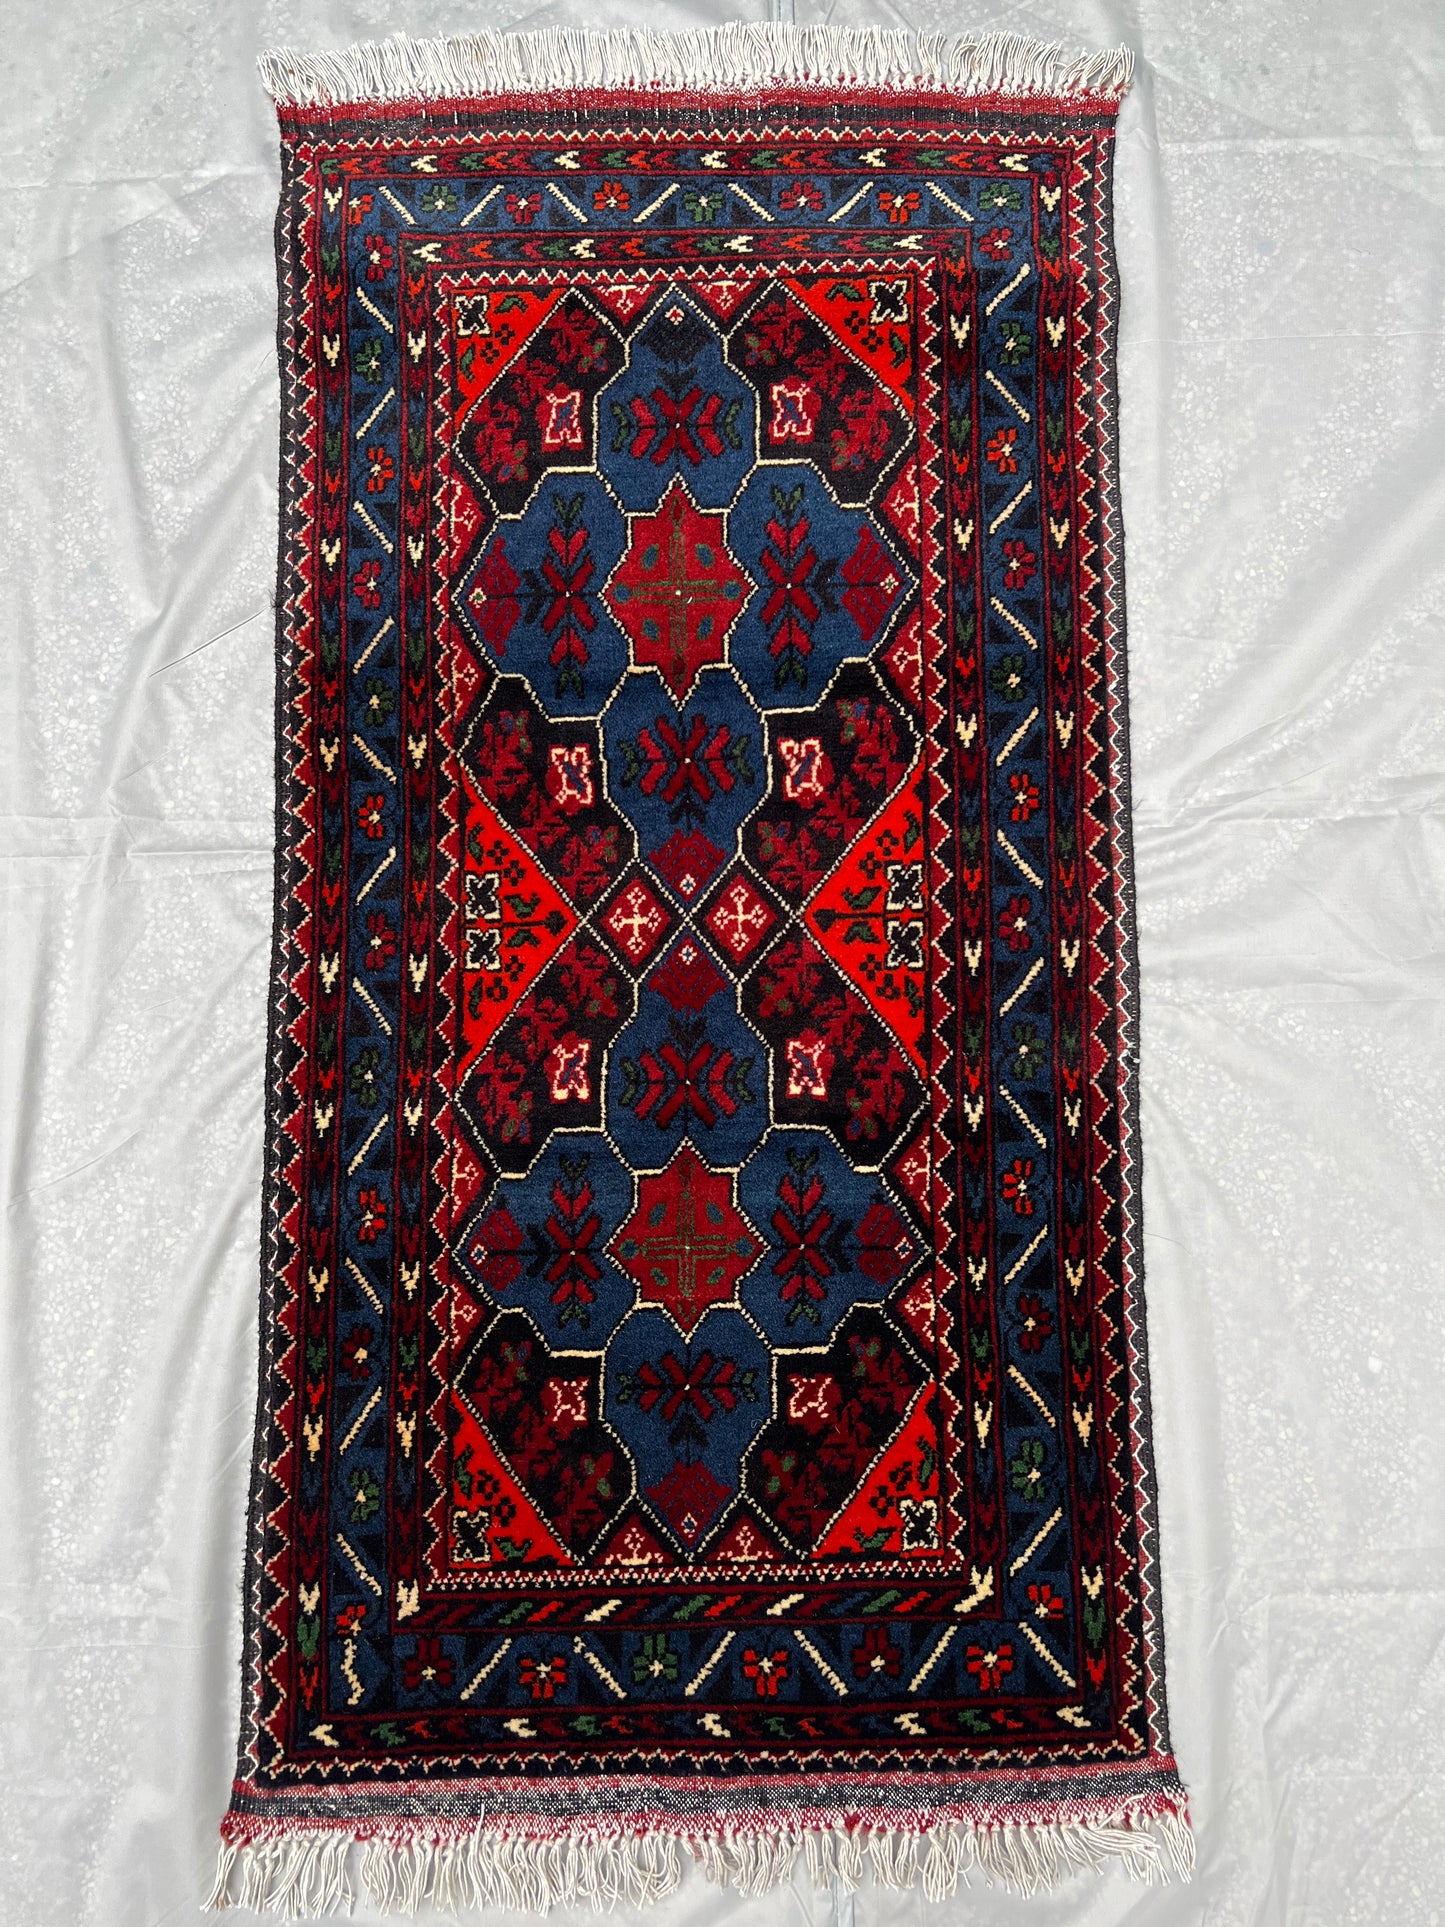 Afghan Hand Knitted Wool Woven Scatter Rug 3ft x 2ft (KM-A-3X2-B/R/W-N) Khal Muhammadi (Andkhoy) - Kabul Rugs